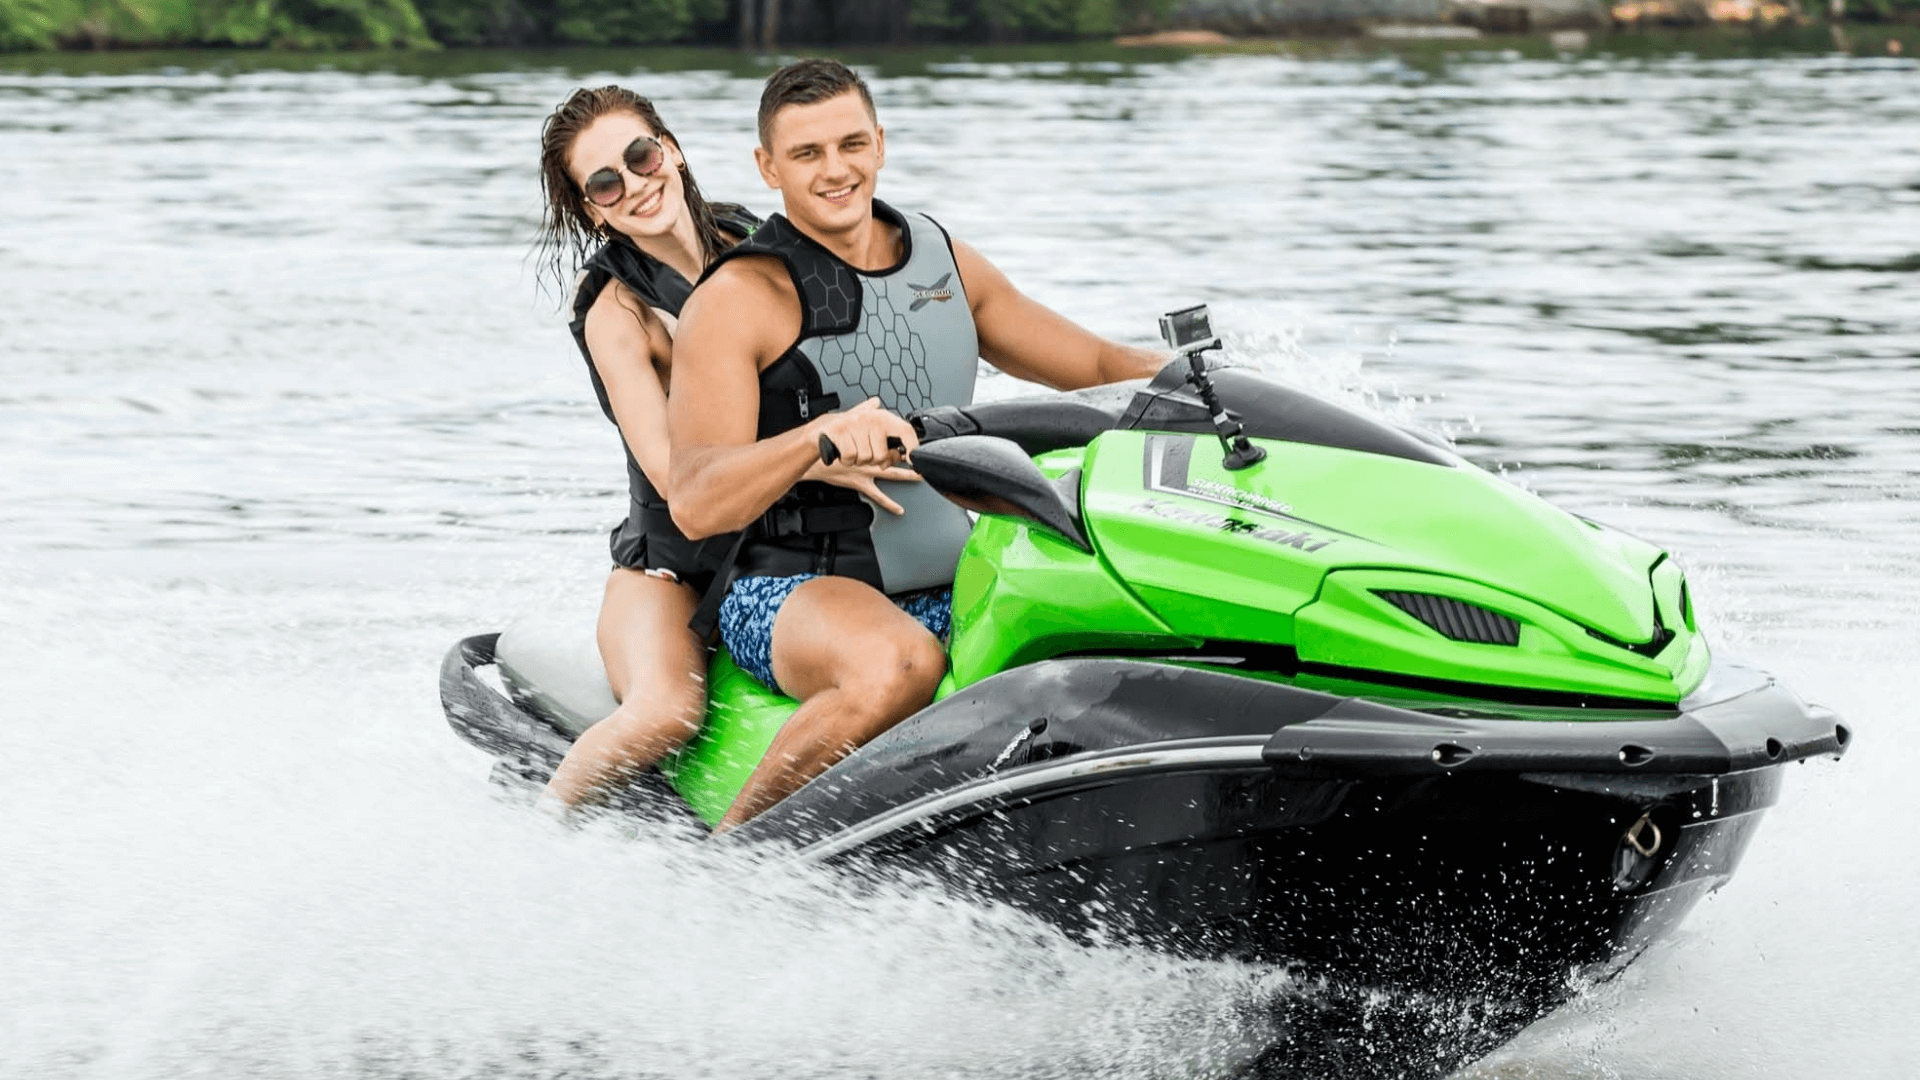 A couple enjoining with the fast Jet sky splashing water